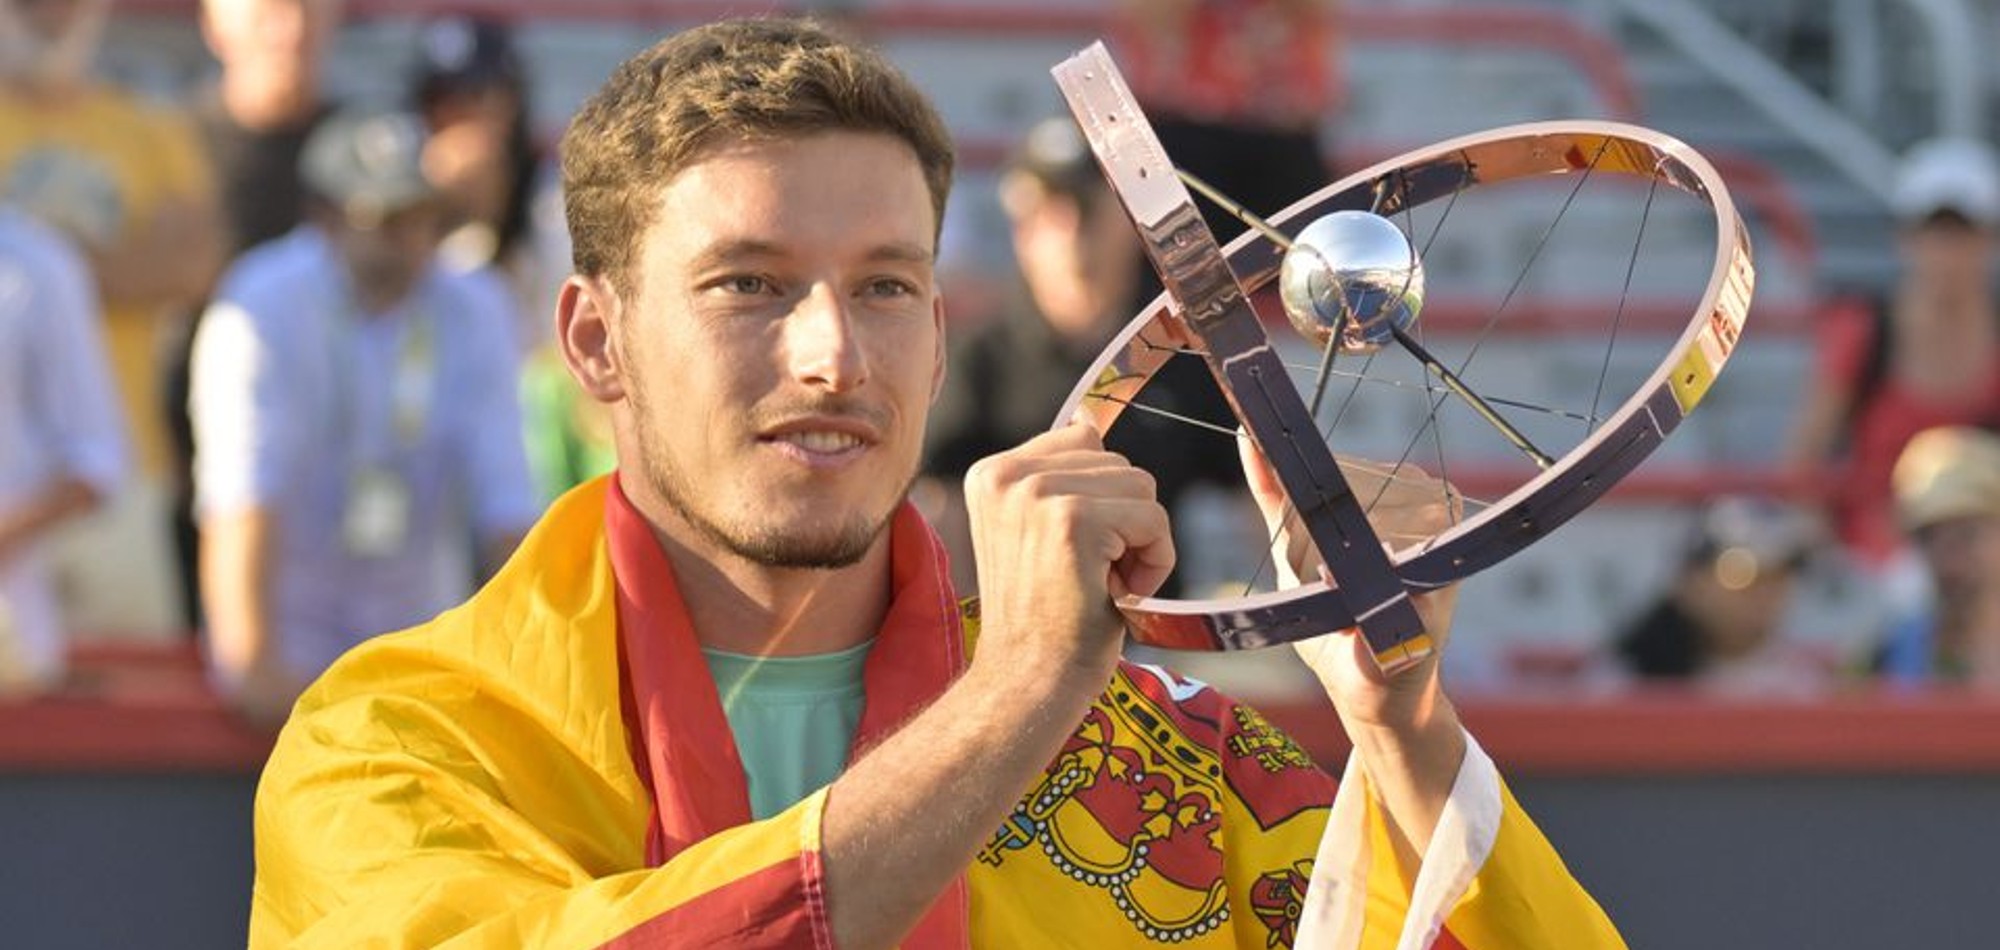 Carreno Busta downs Hurkacz for maiden Masters 1000 title